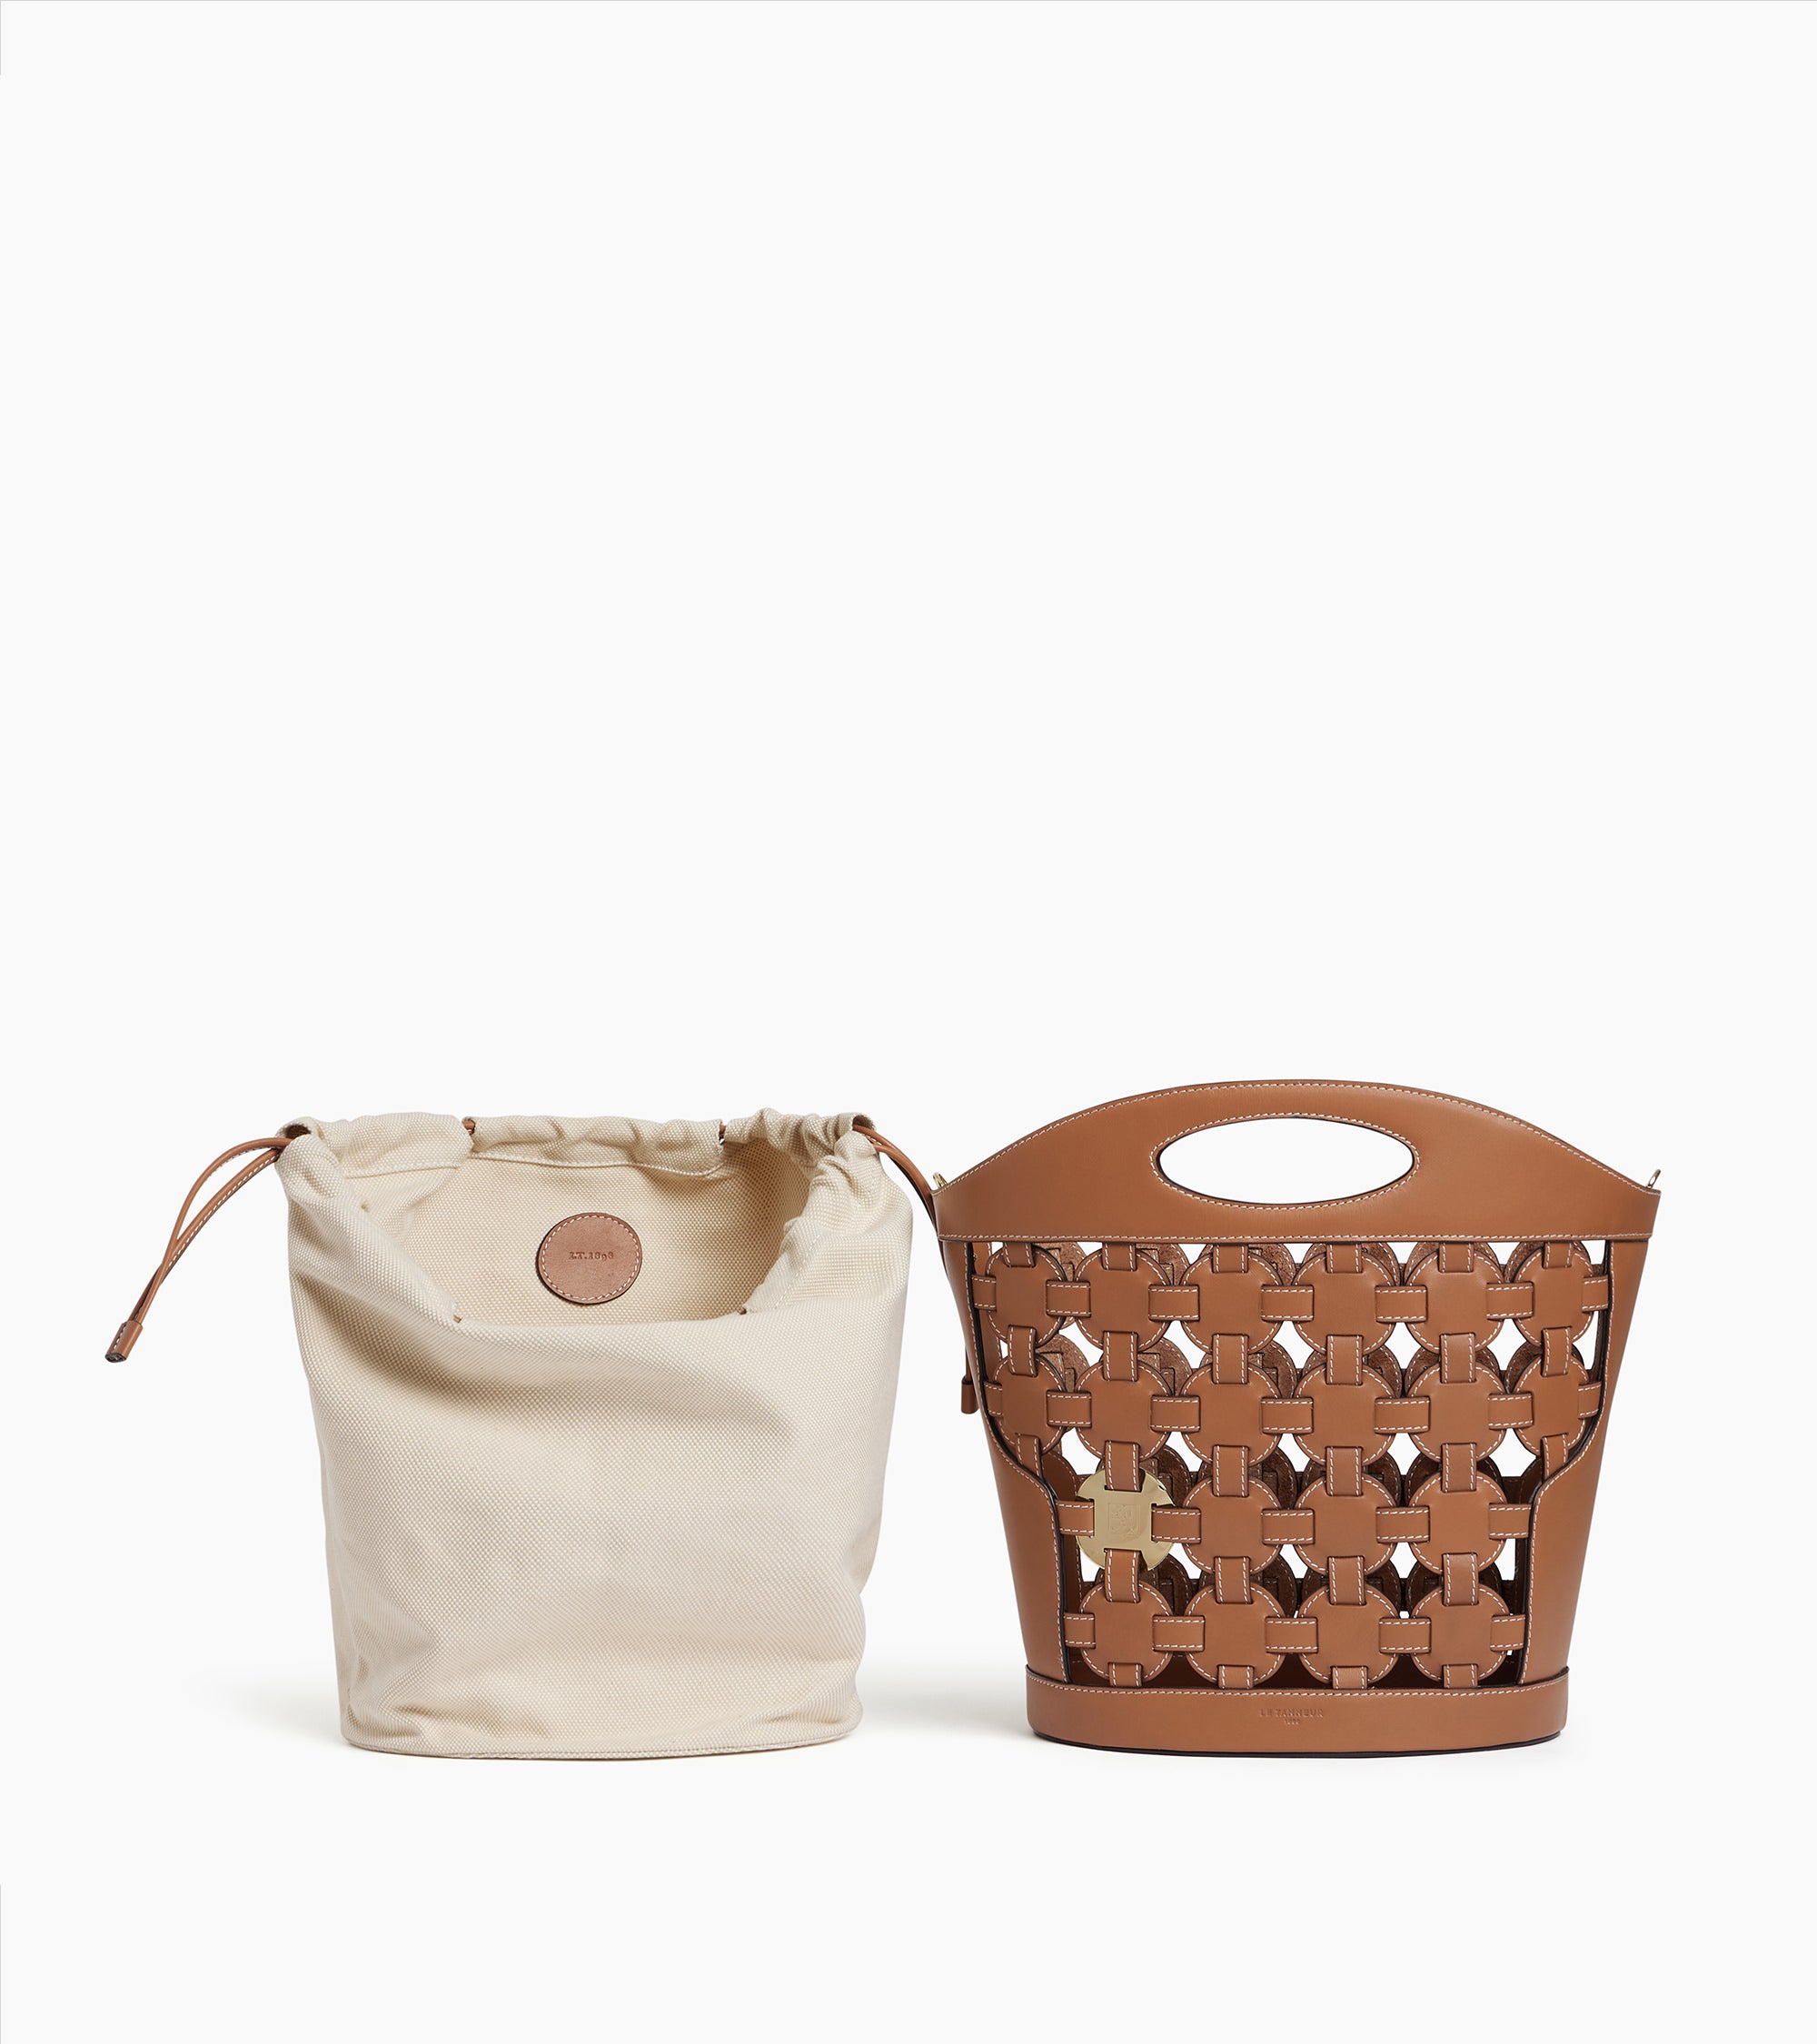 Bucket bag Le Potier in cotton canvas and smooth leather